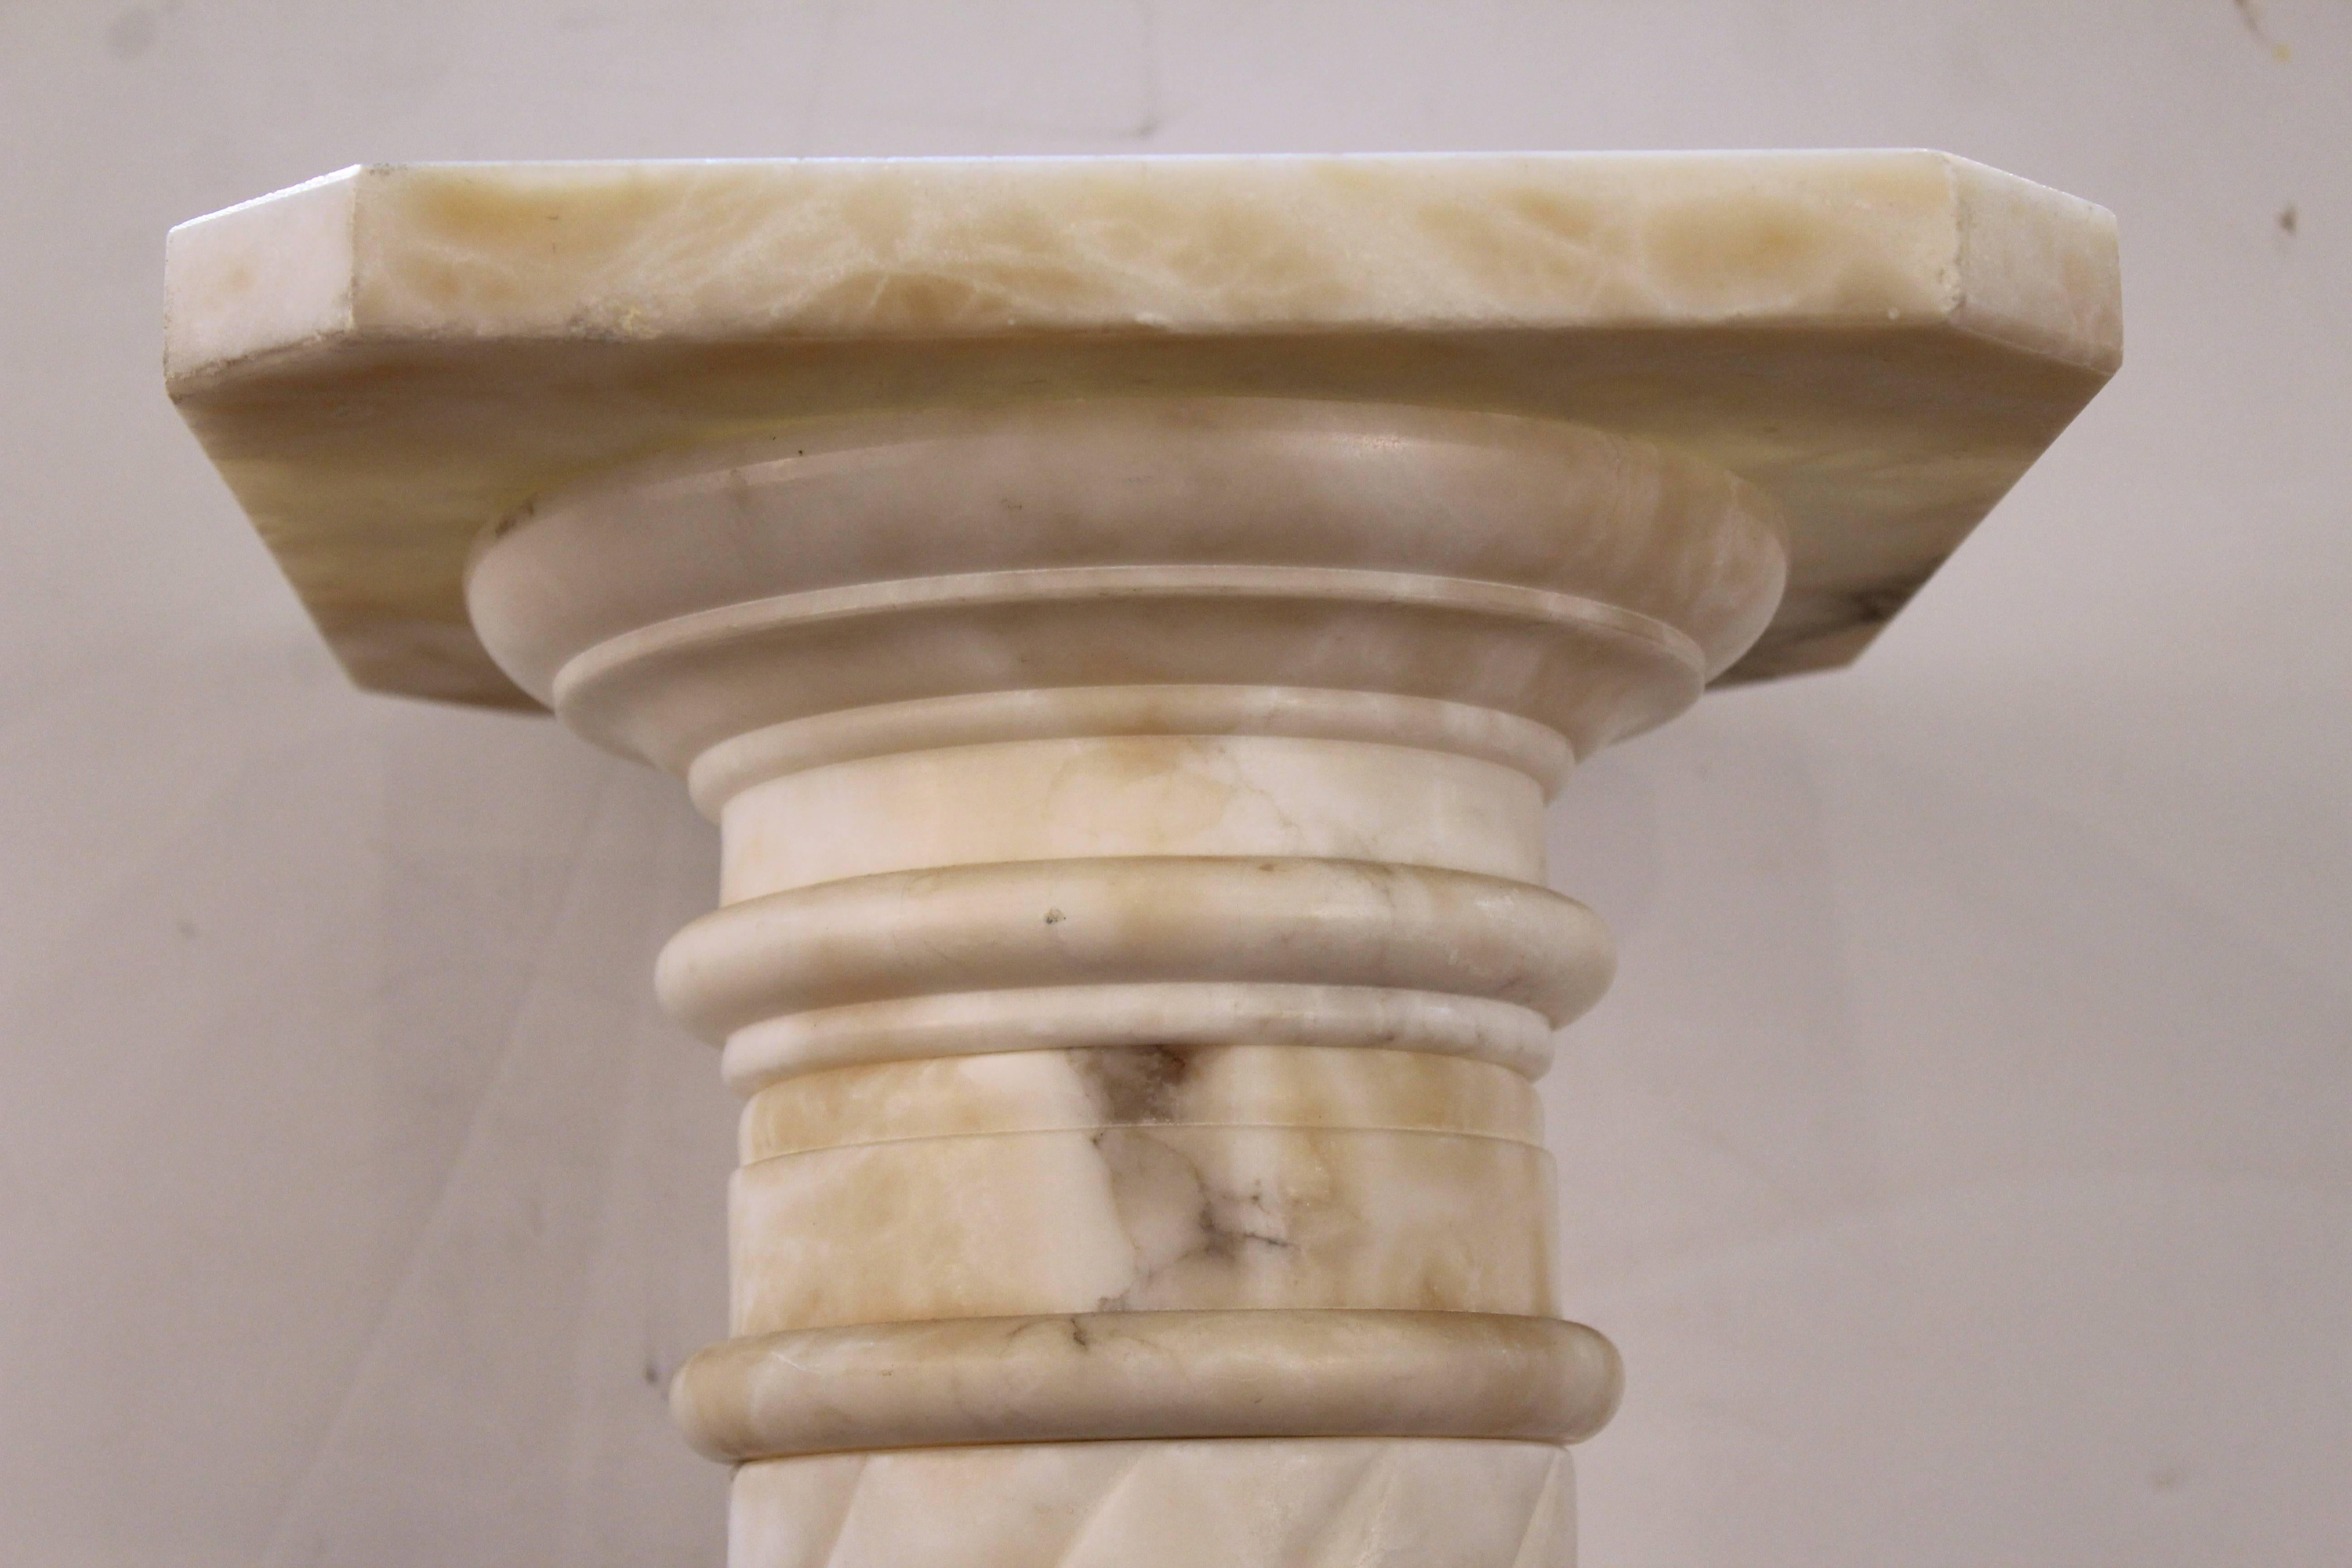 A Victorian pedestal in sculpted white marble. The marble shaft is in a twisted form and has a central ring with stylized motive of sculpted leaves. In very good vintage condition with age appropriate use and wear.